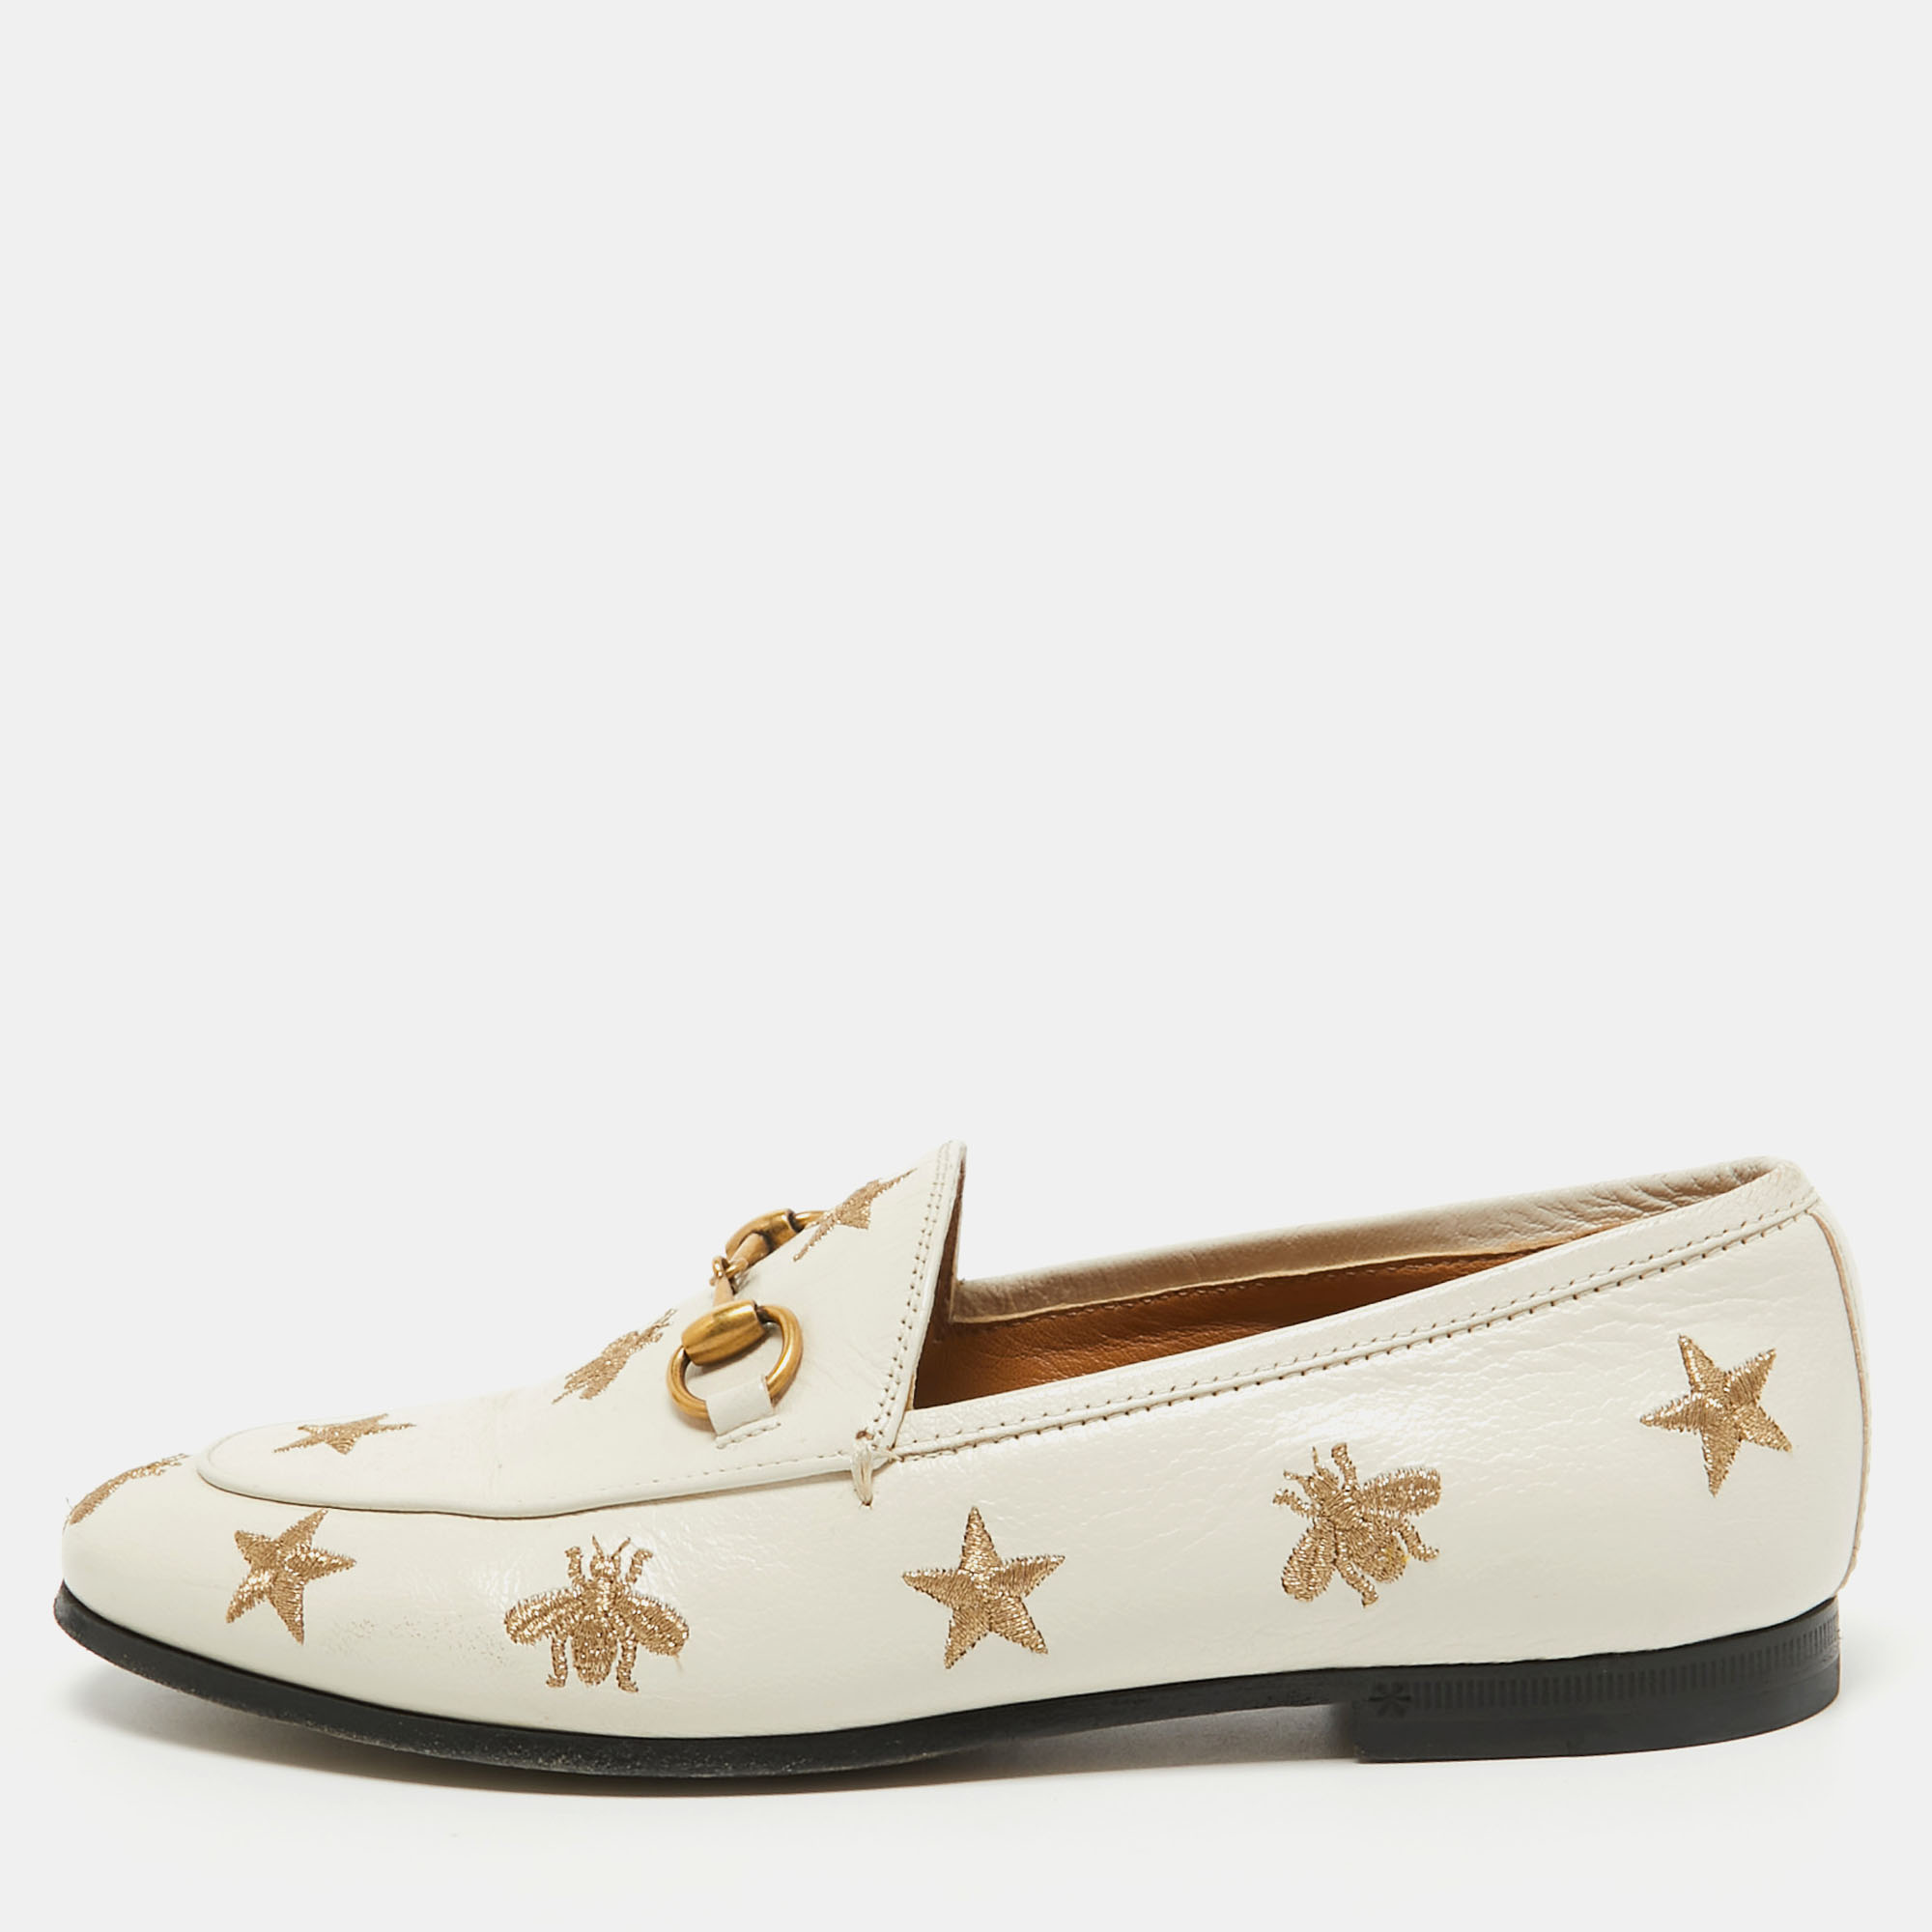 Gucci cream leather jordaan embroidered bee horsebit slip on loafers size 35